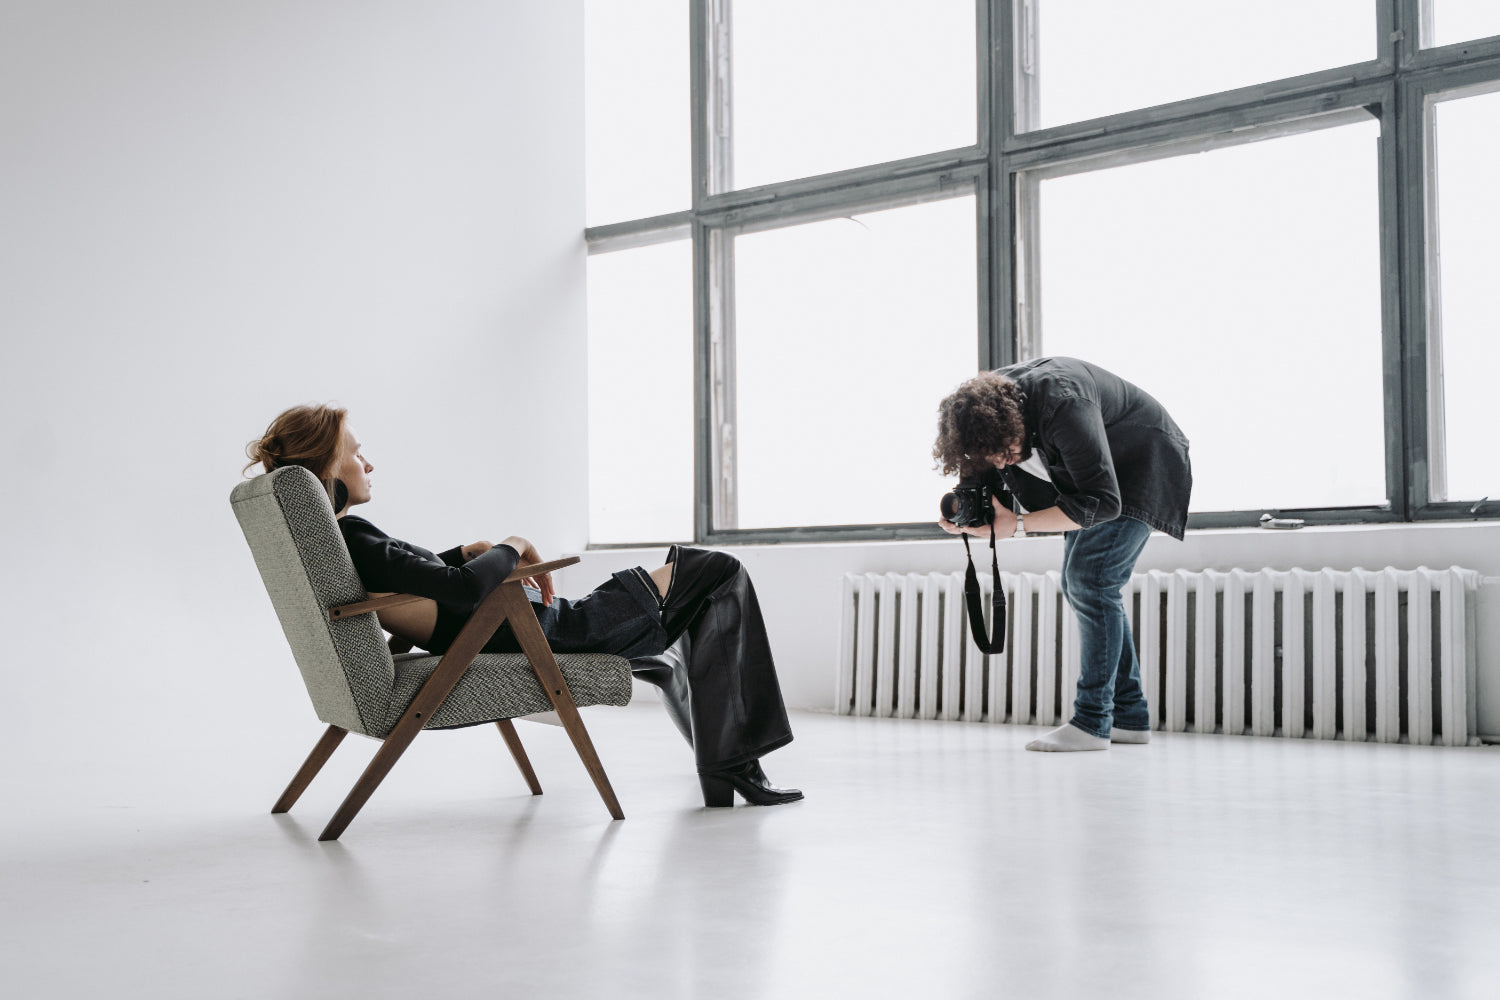 A model lounges on a chair, posing for a photographer